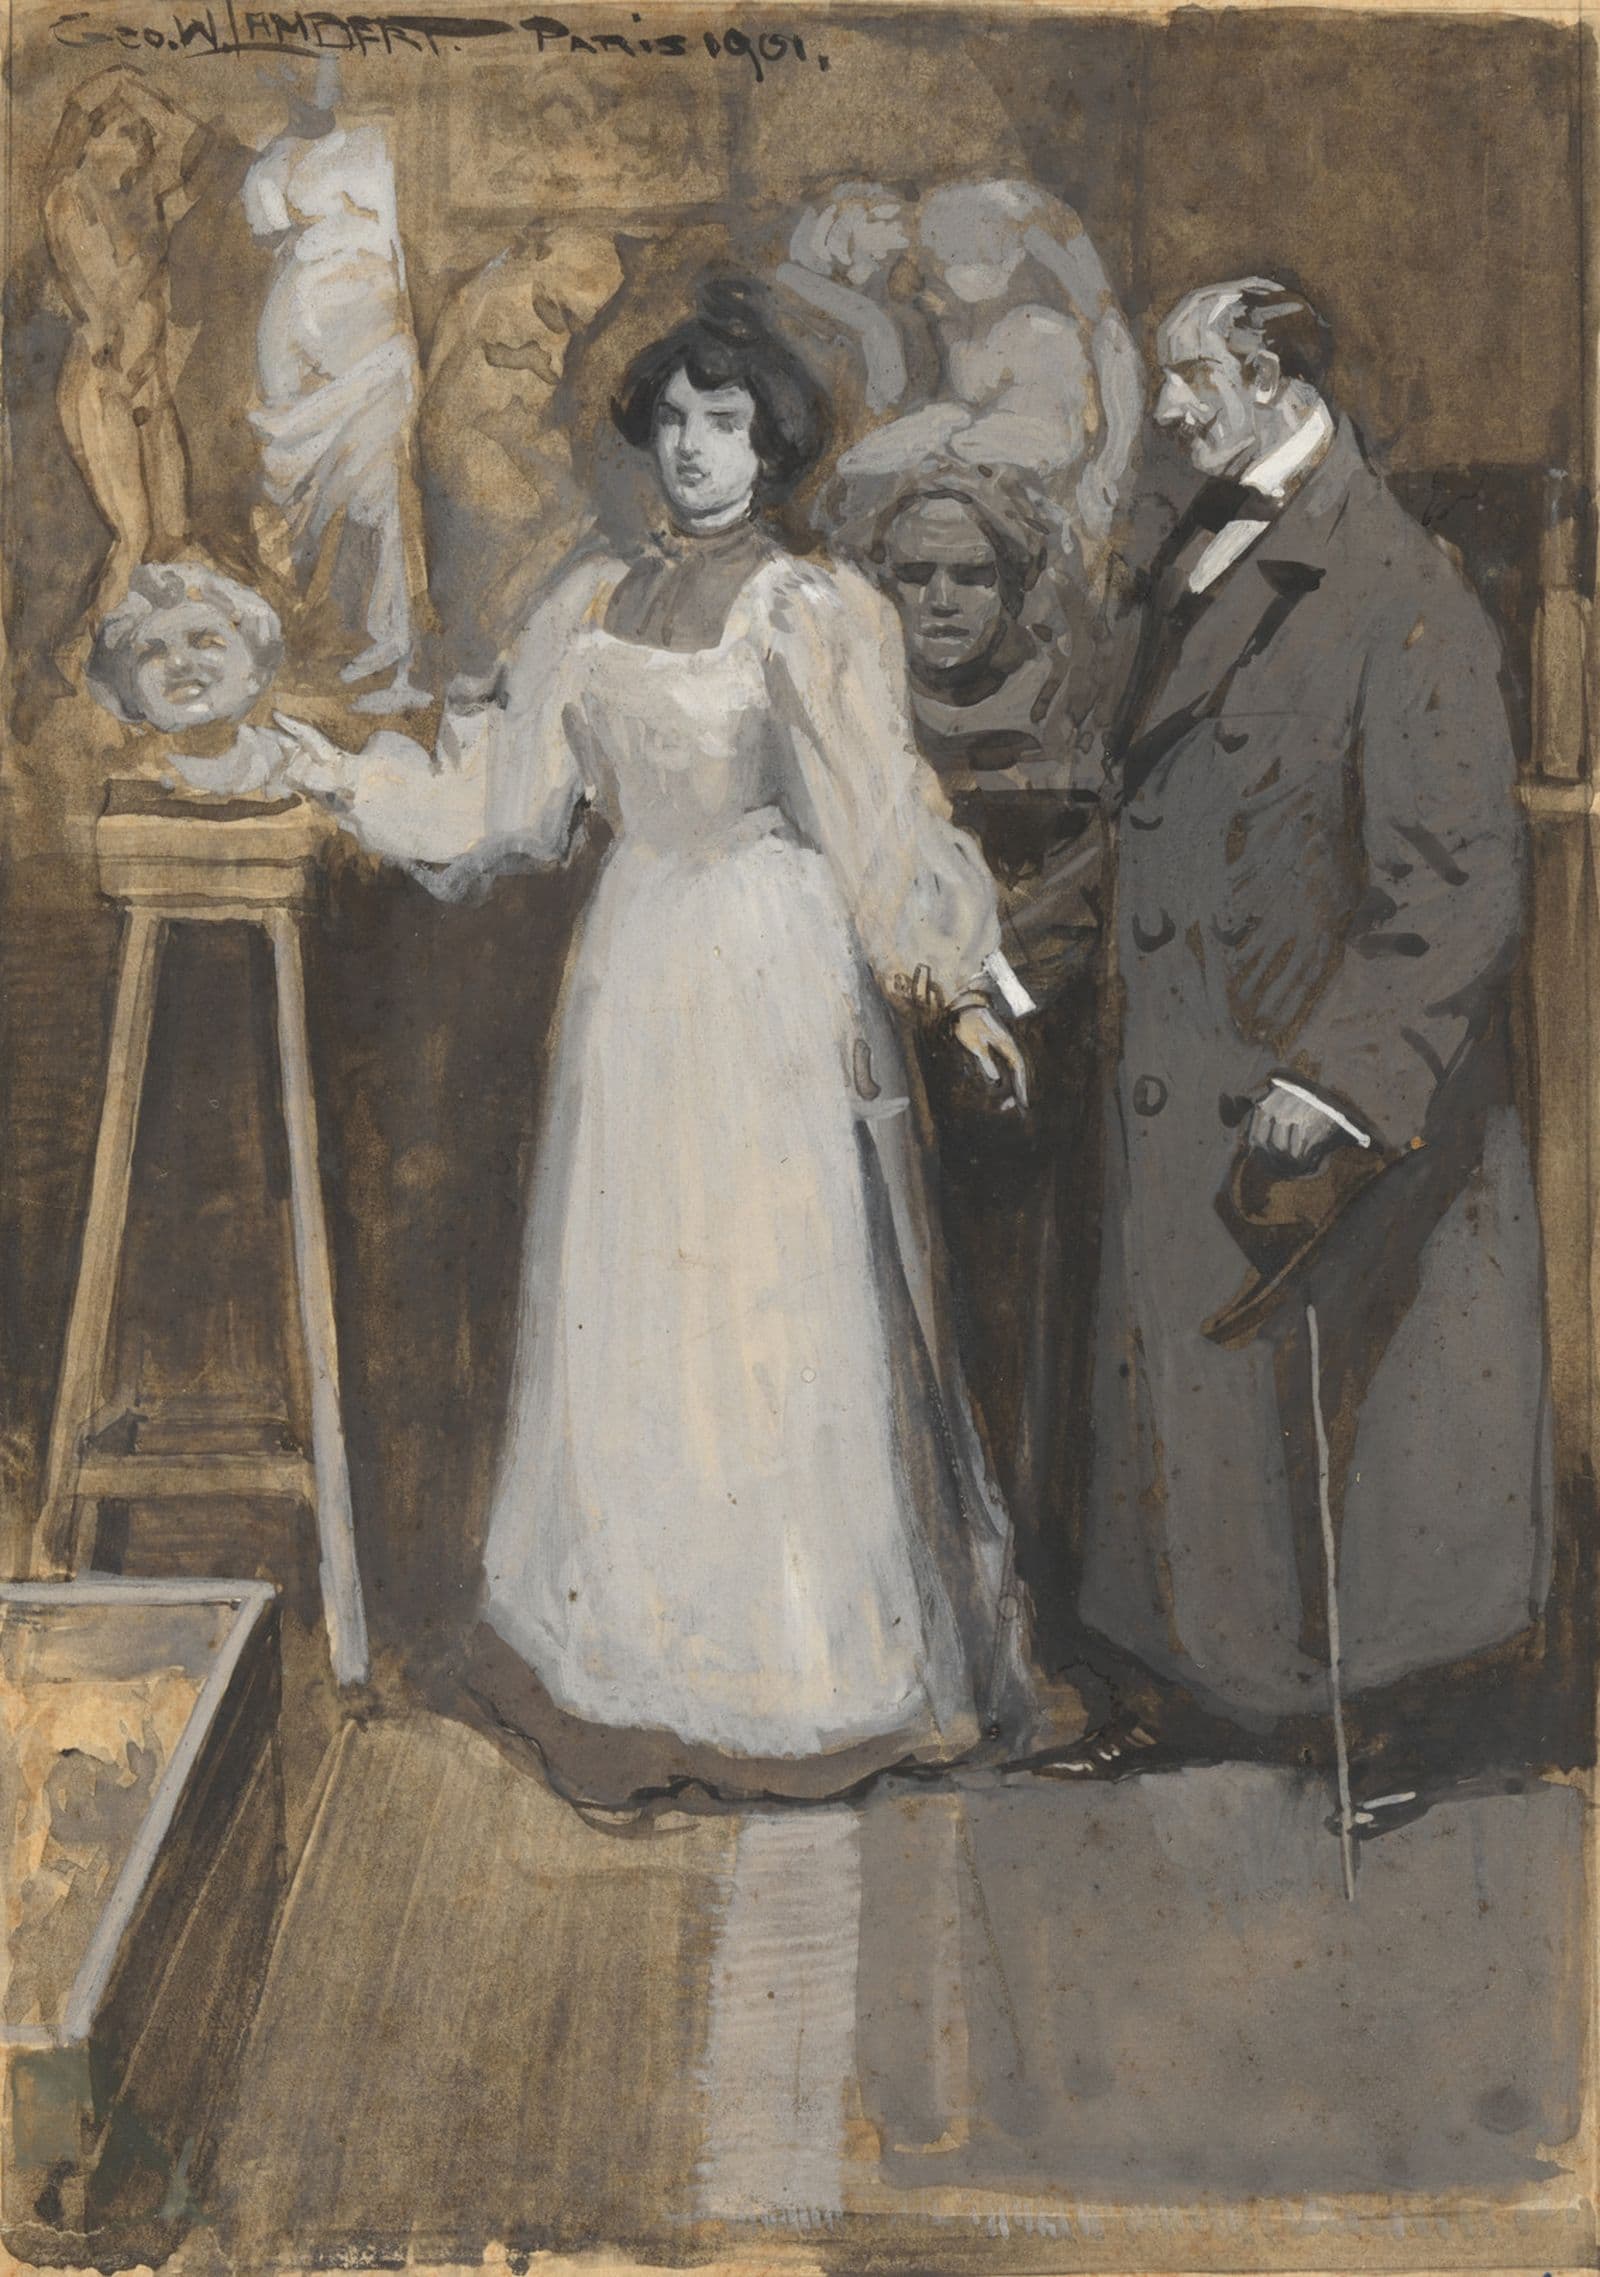 A black, white and grey drawing of a woman and a man in a sculptor's studio